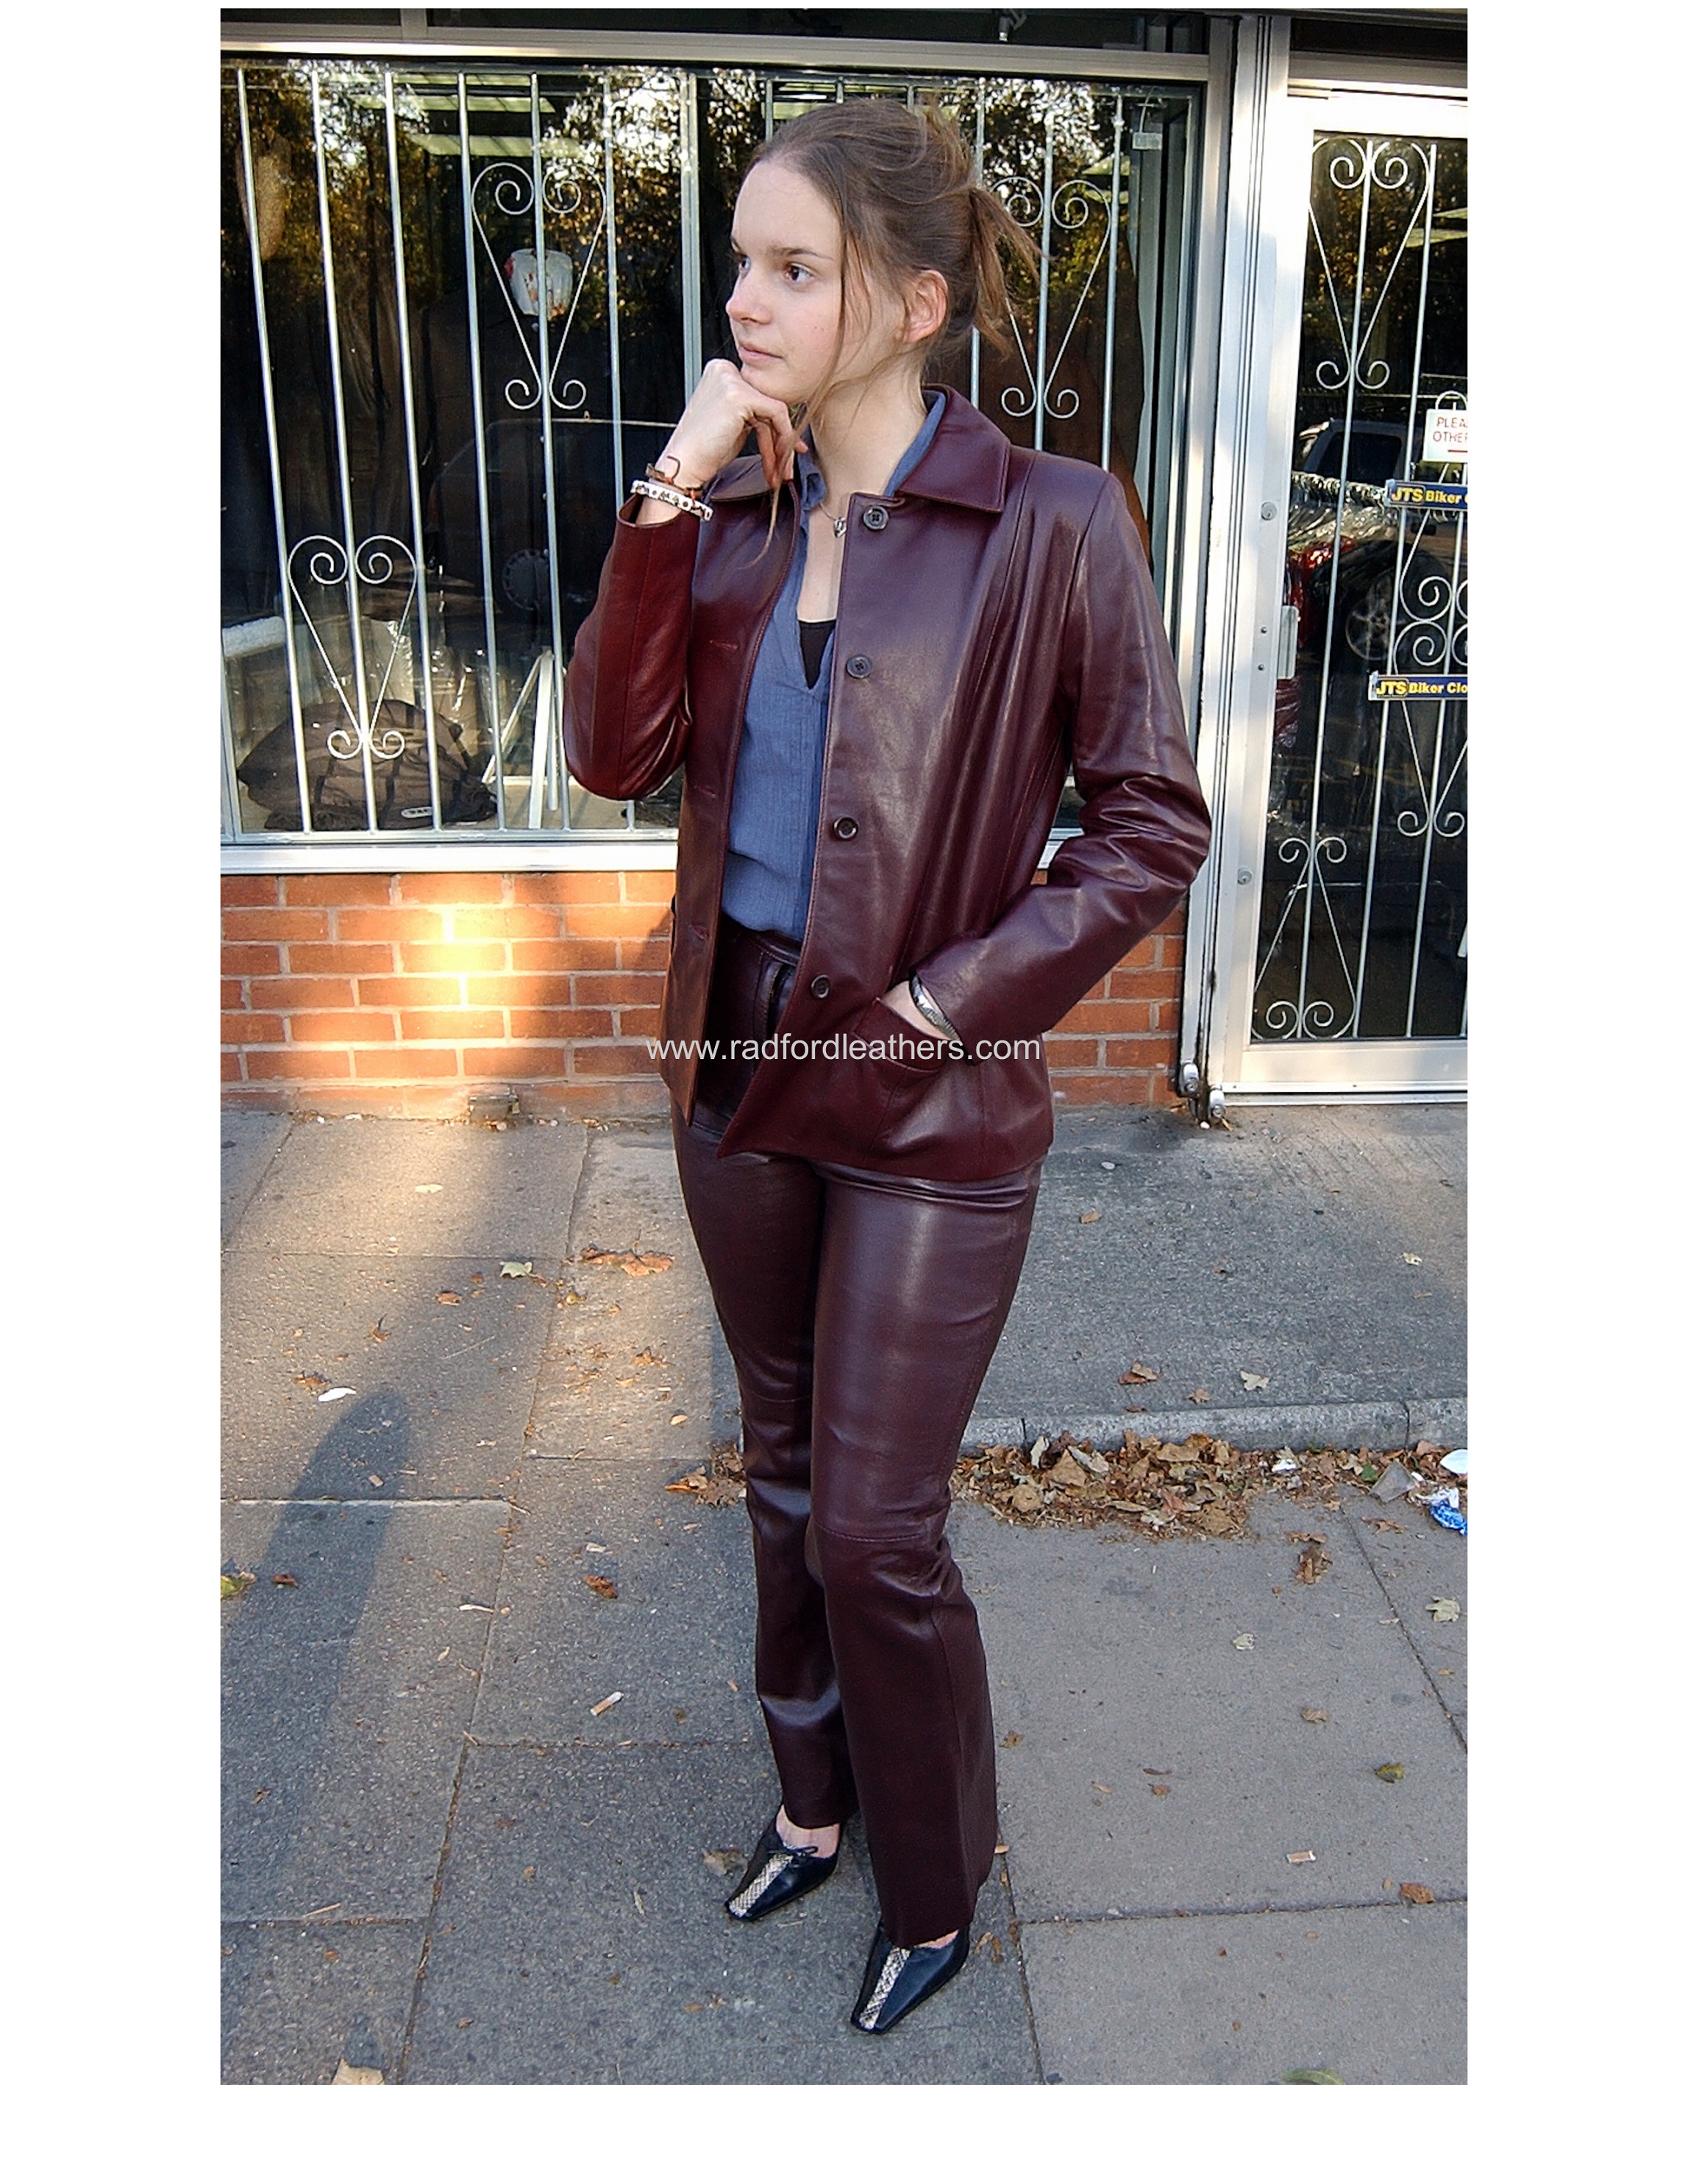 Ladies Short Leather Jackets Archives - Radford Leather Fashions ...